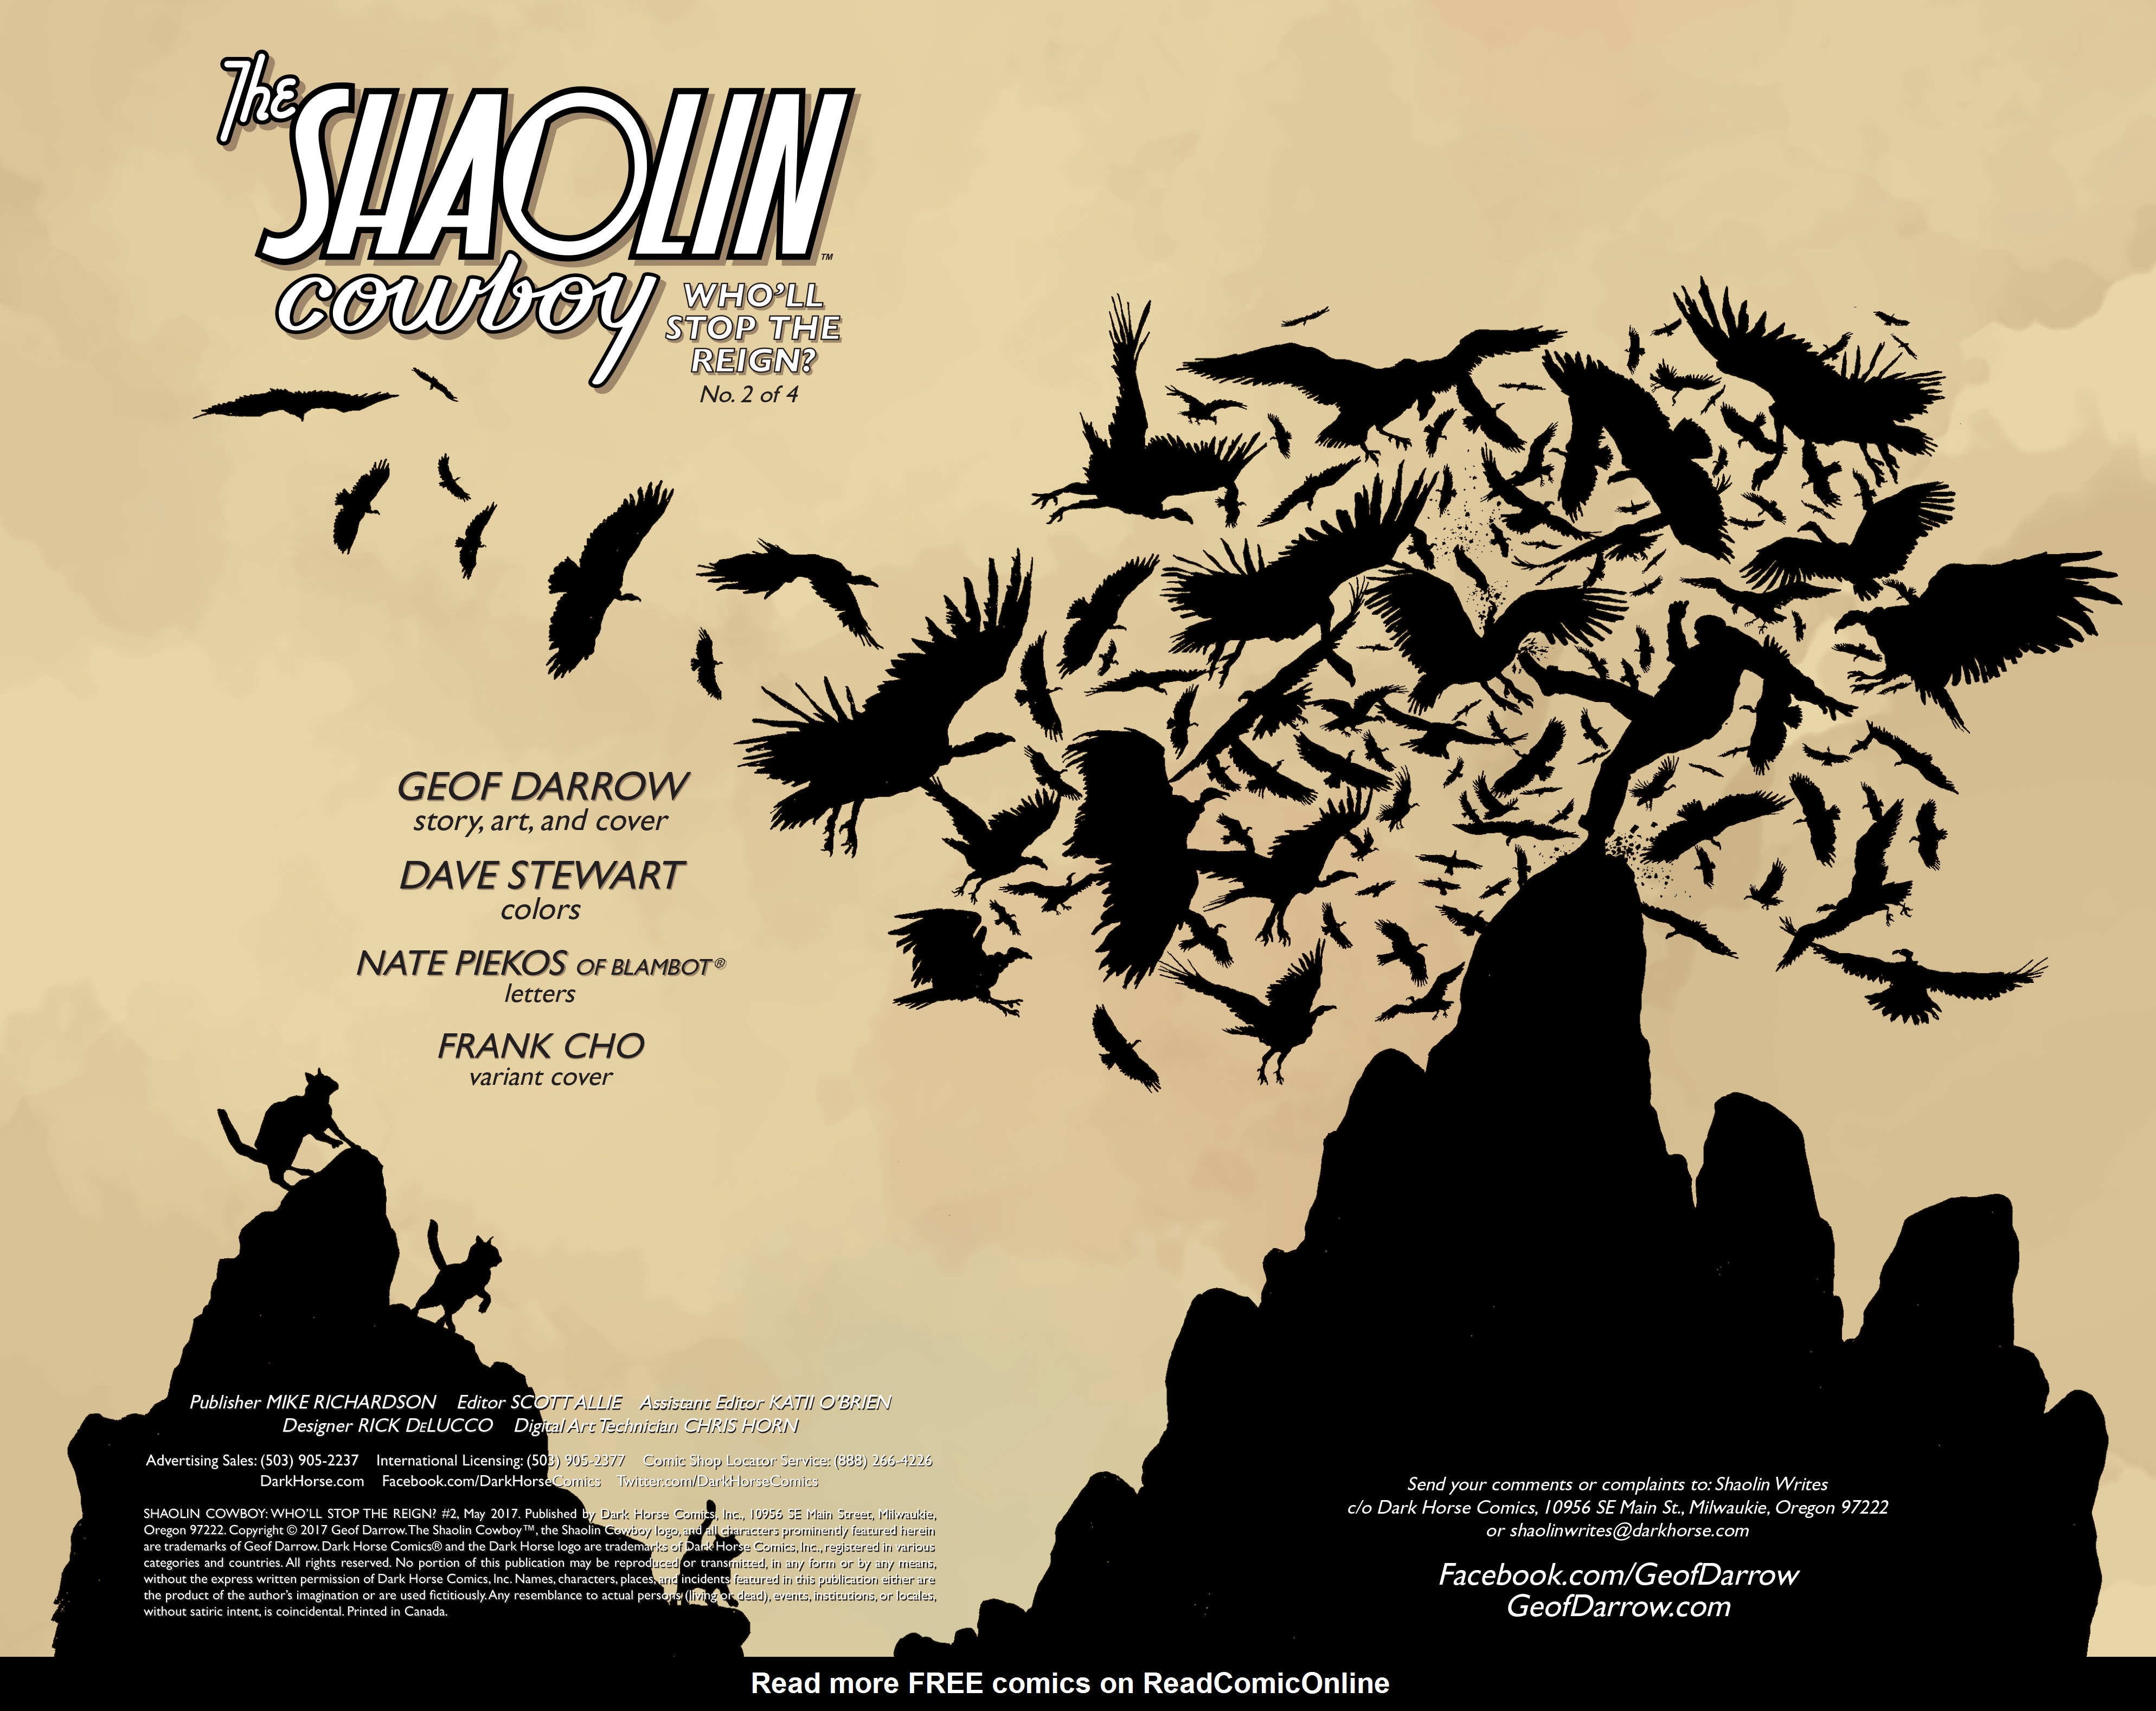 Read online The Shaolin Cowboy: Who'll Stop the Reign? comic -  Issue #2 - 3